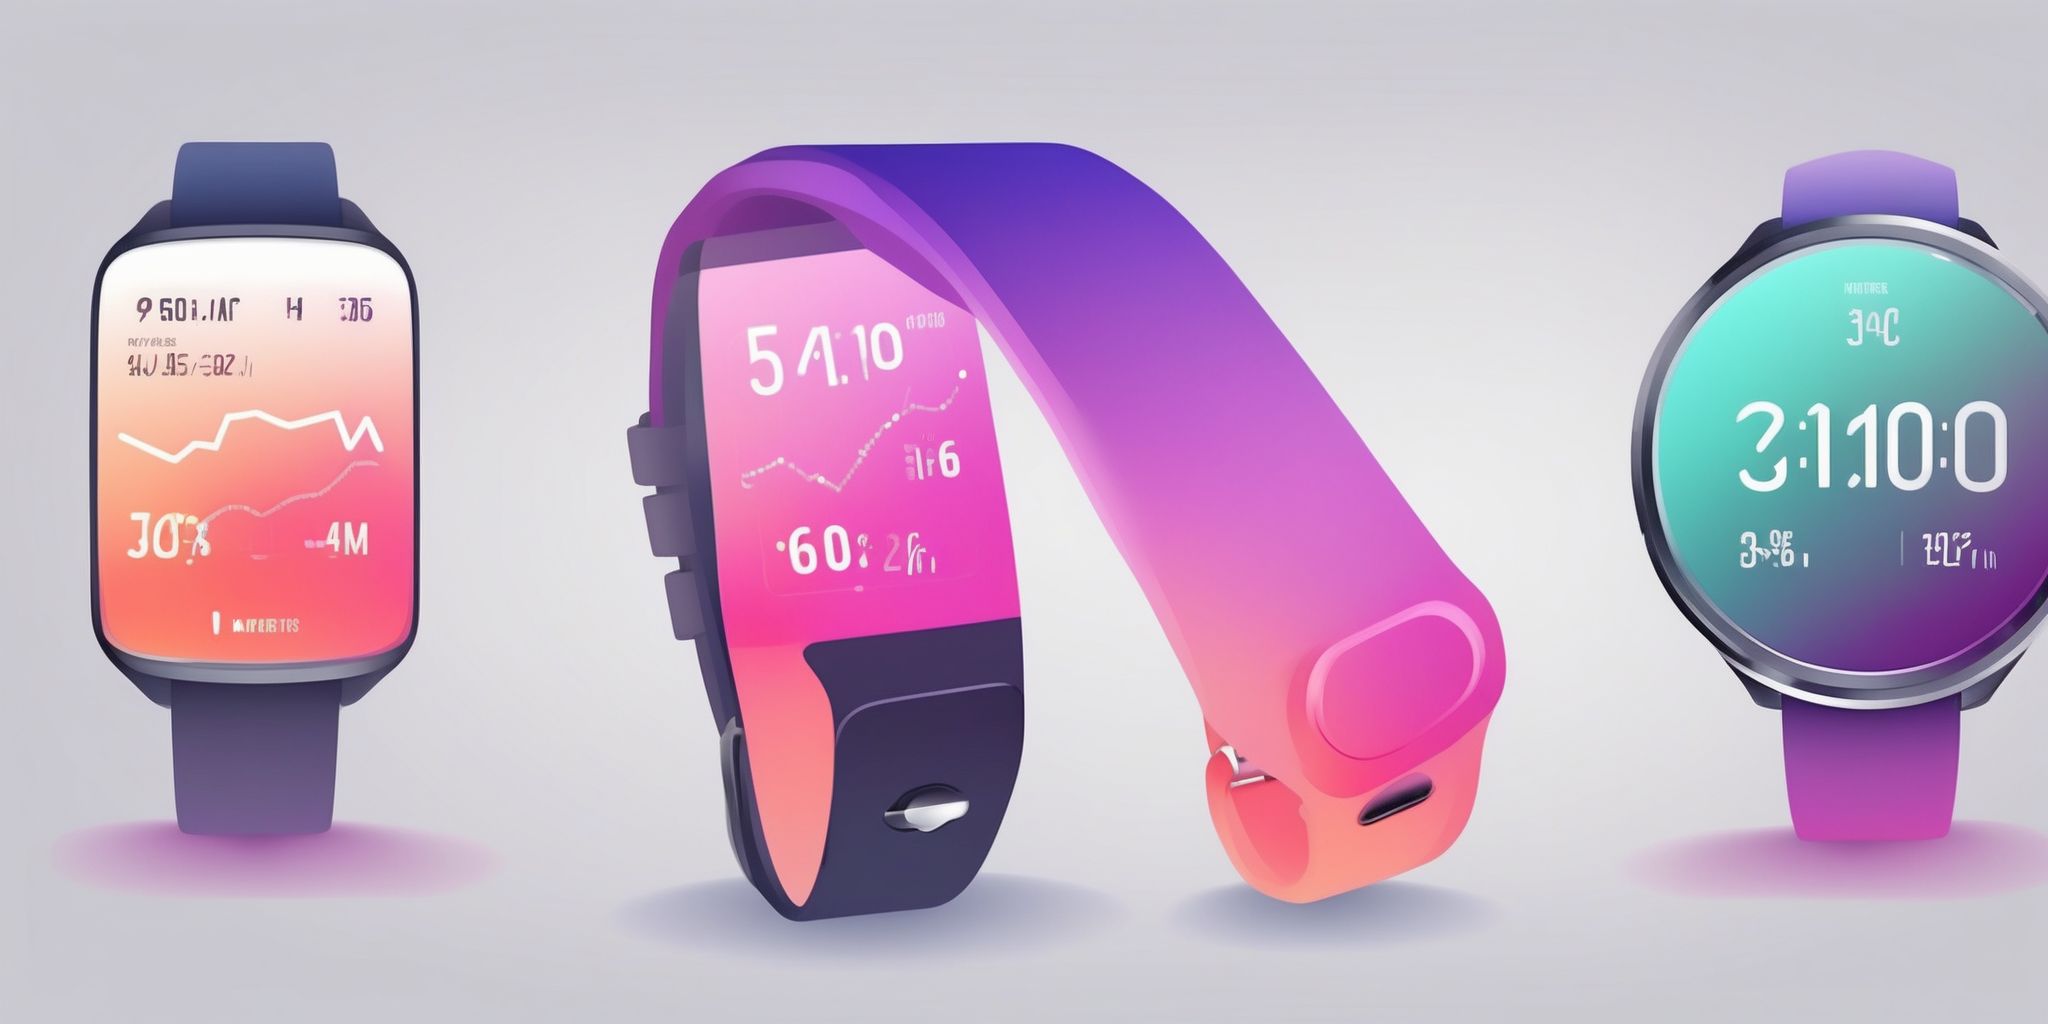 Fitness tracker in illustration style with gradients and white background